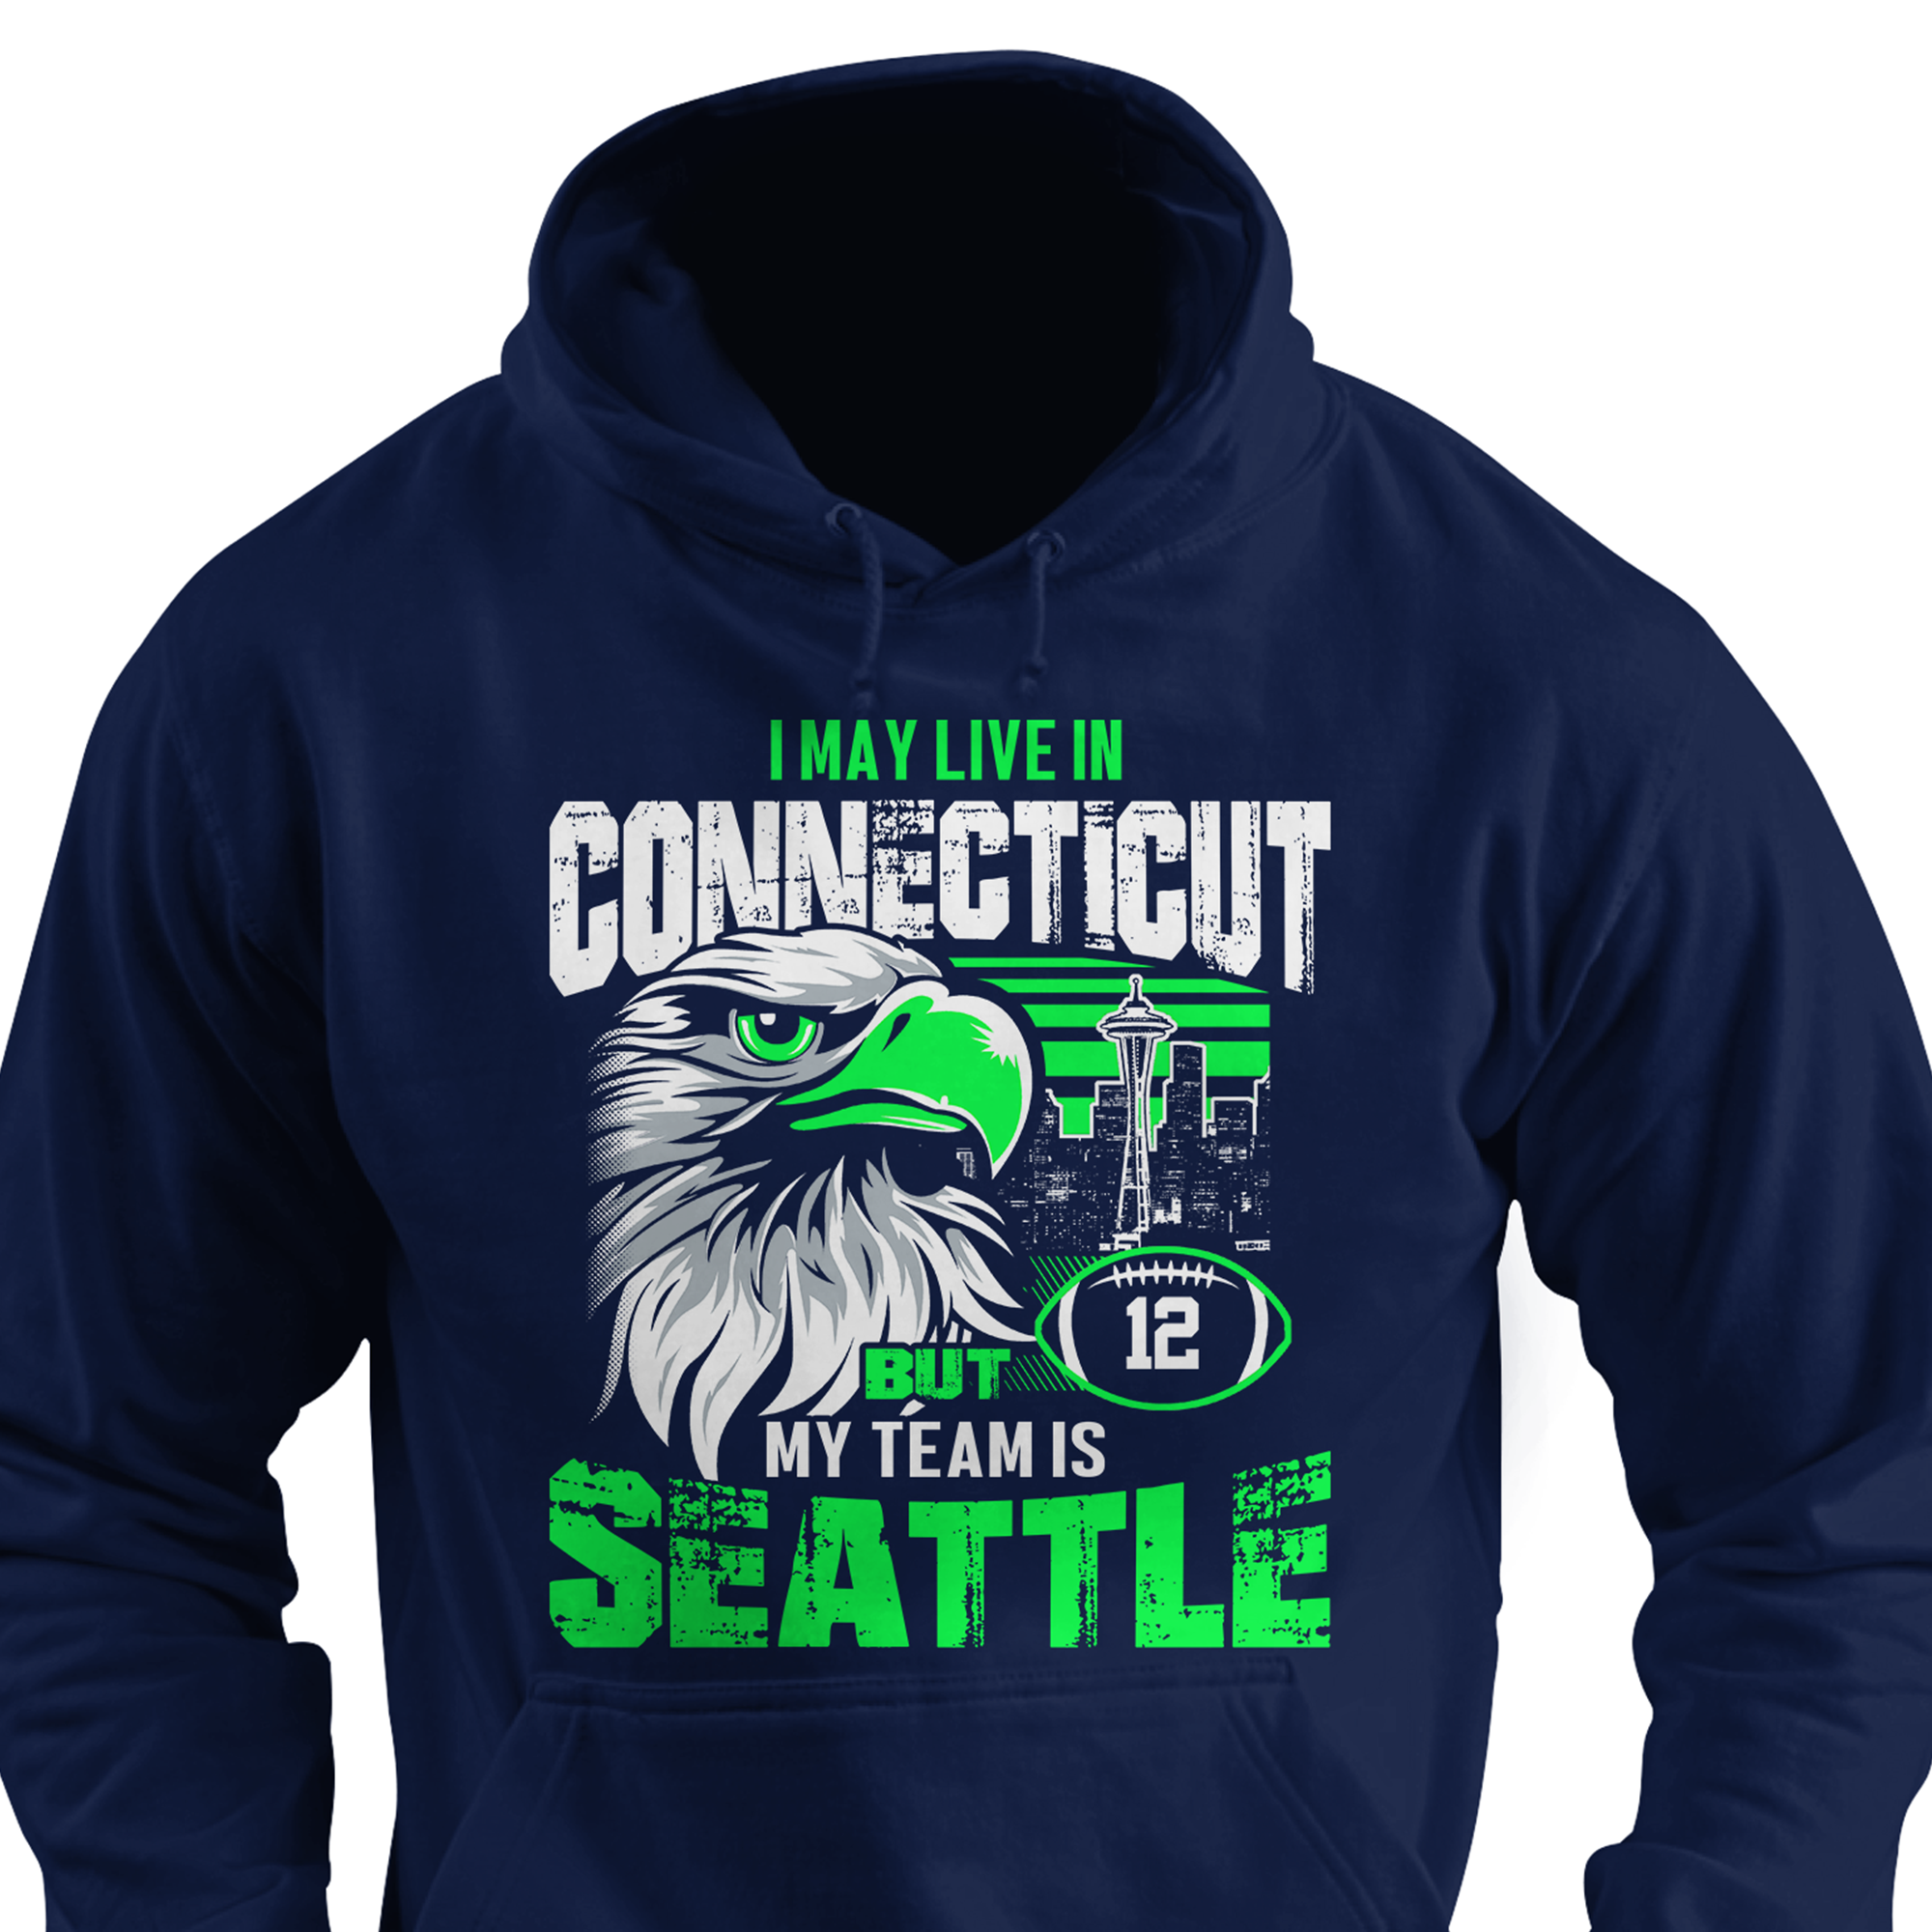 I may live in Connecticut but my team is Seattle